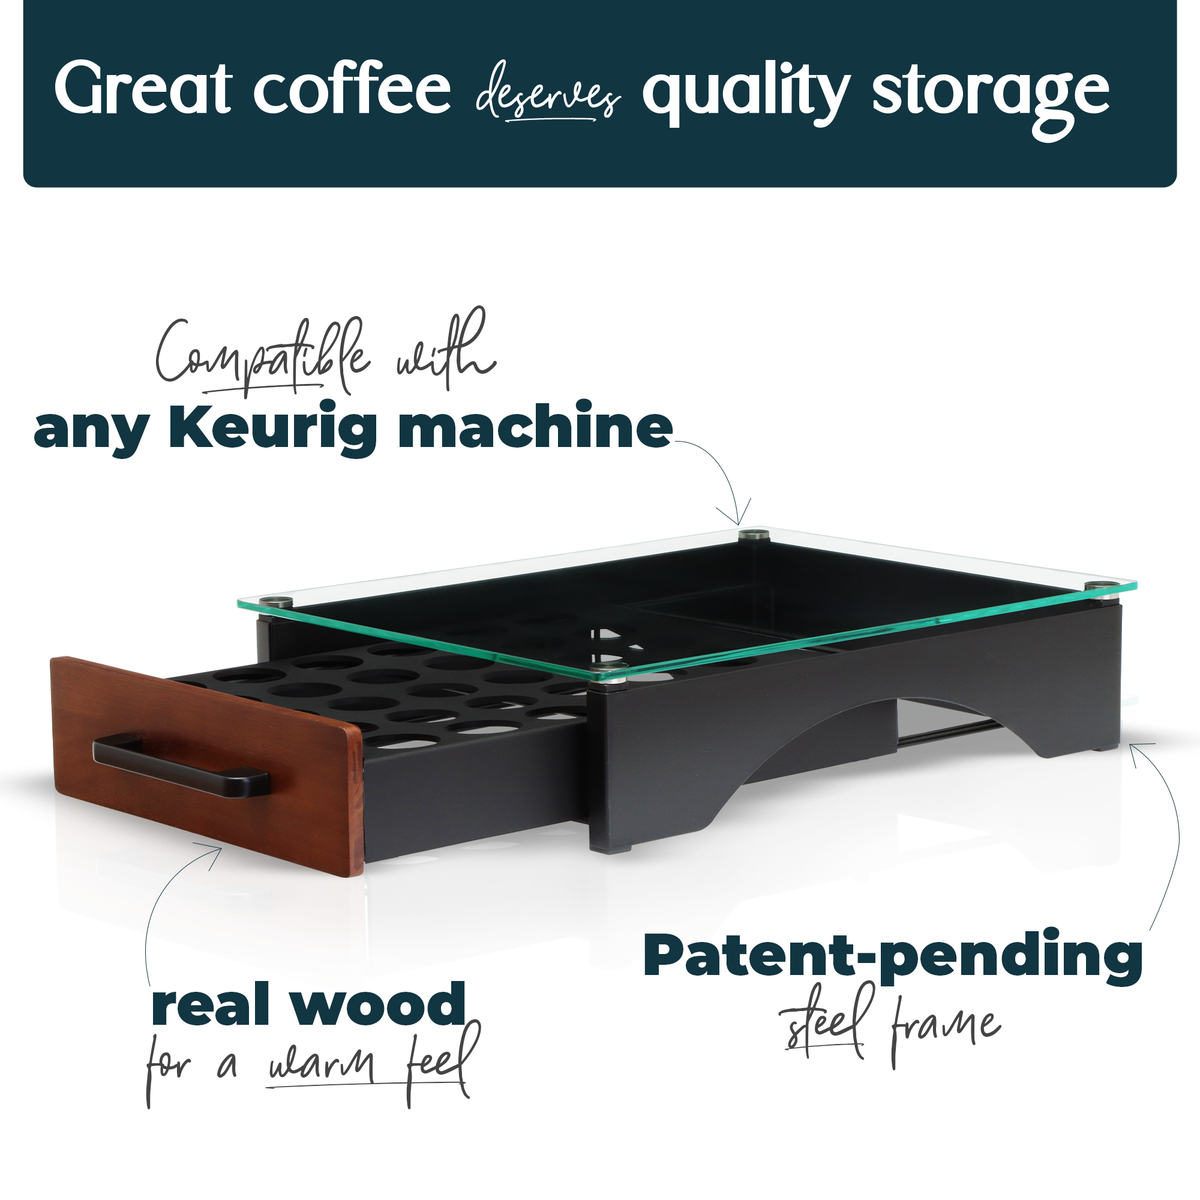 A quality storage for your coffee that is compatable with any Keurig machine